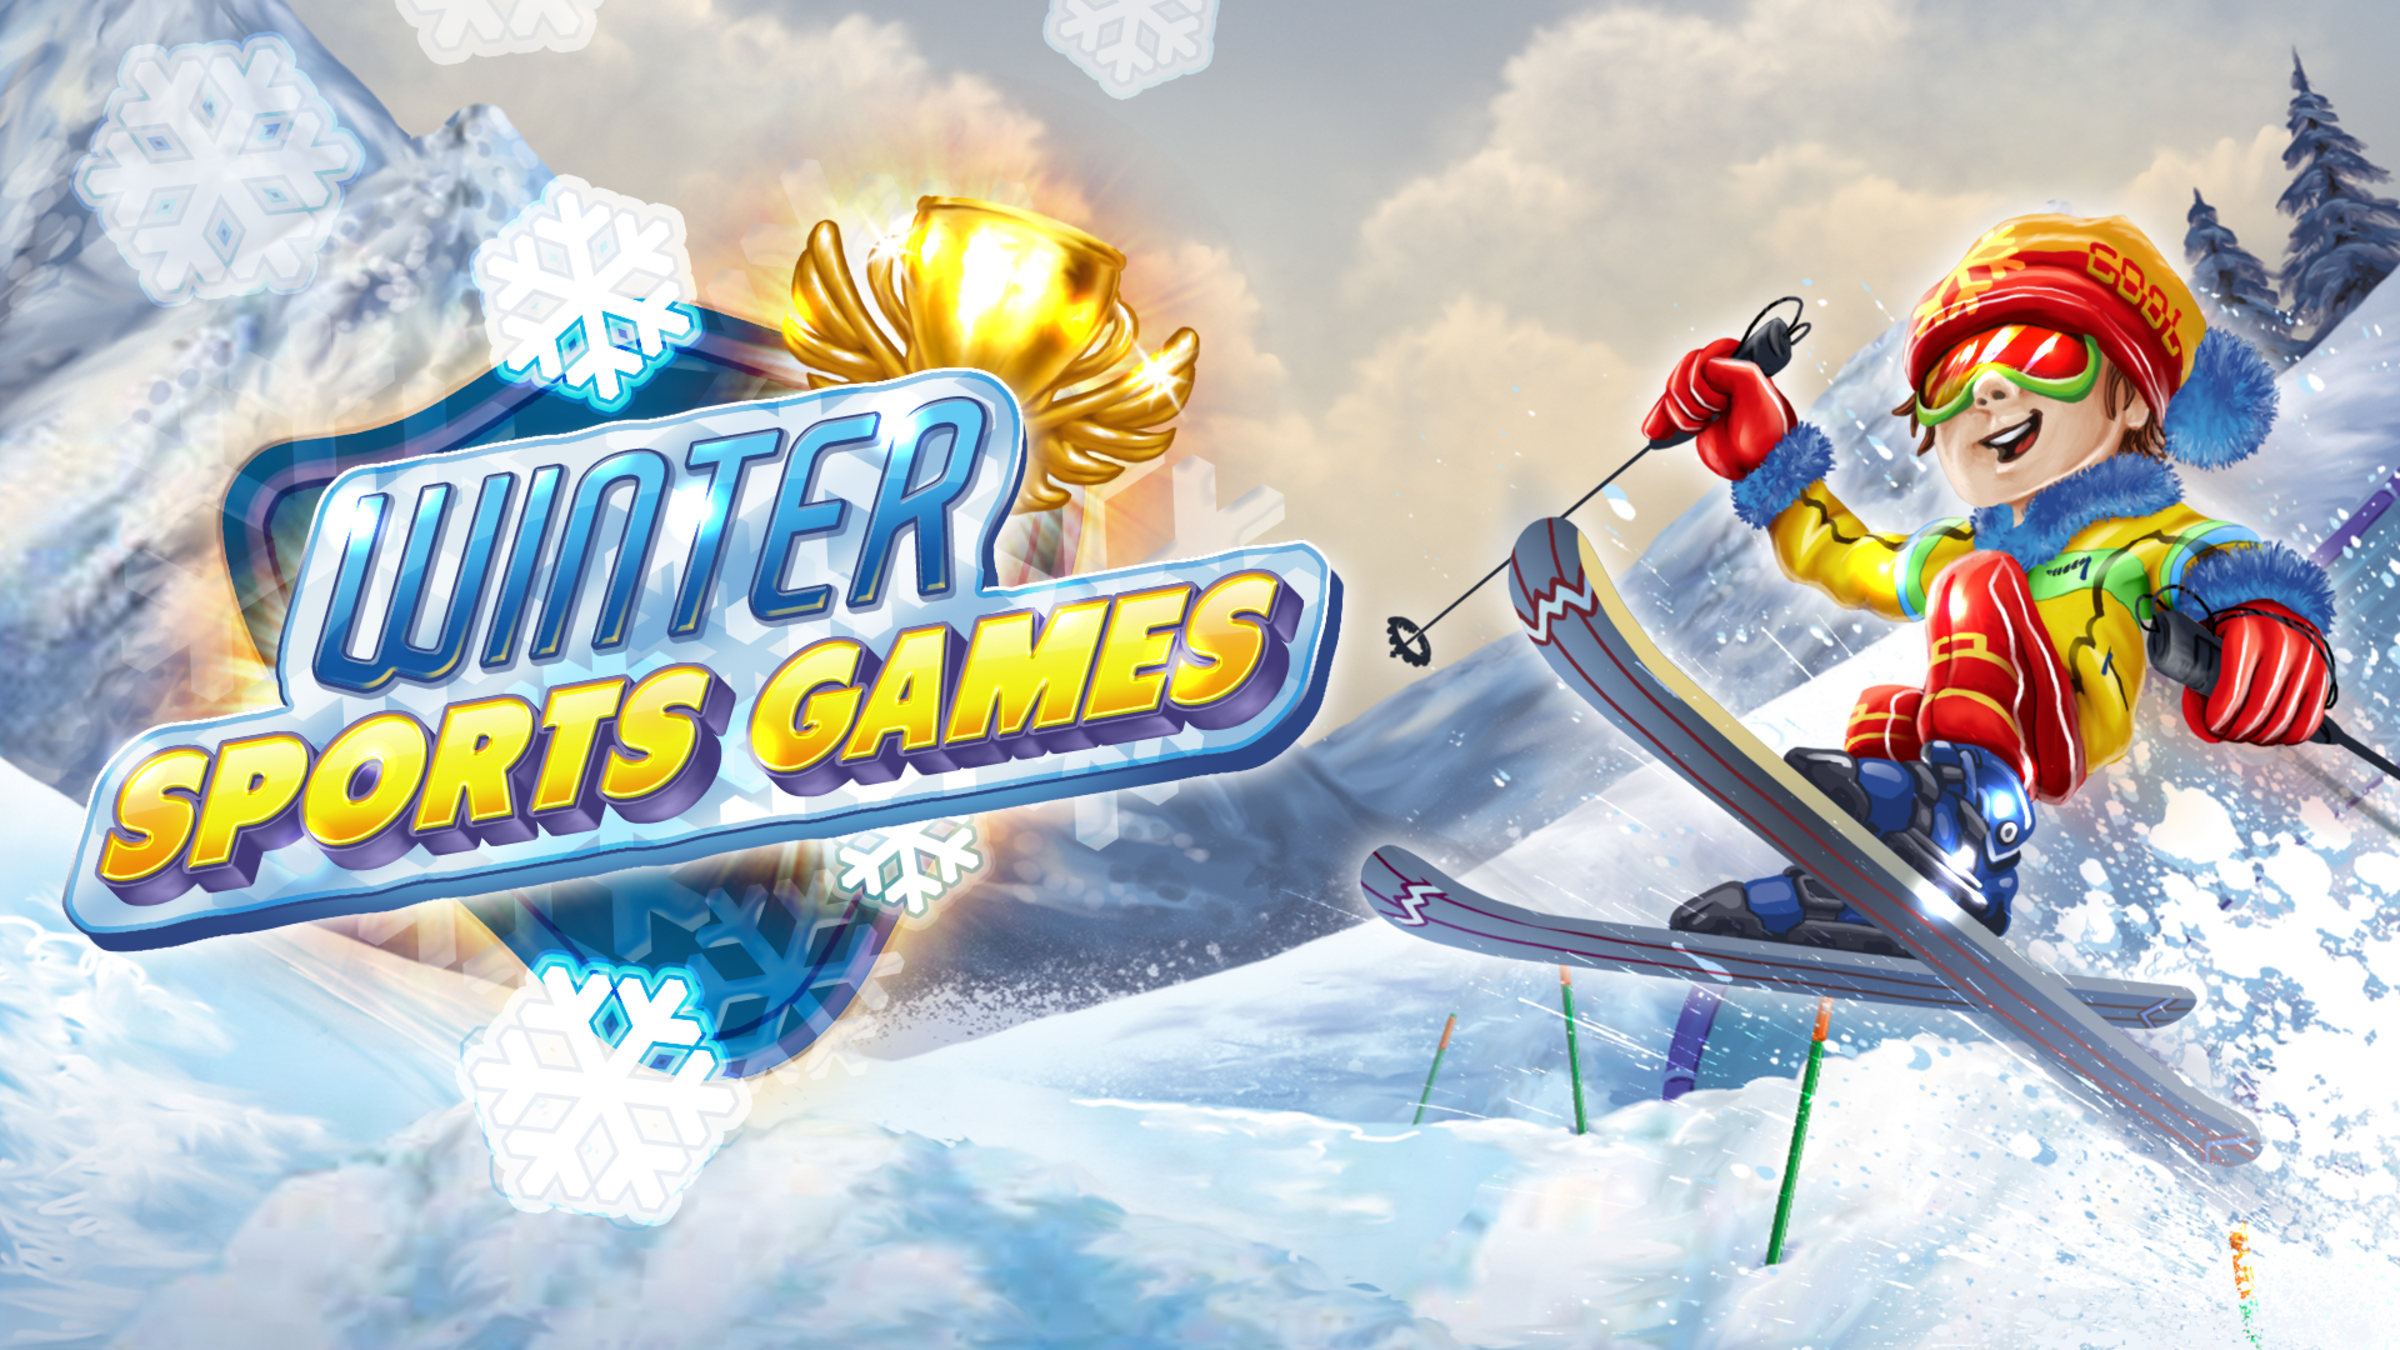 Winter Sports Games Official Site for - Nintendo Switch Nintendo